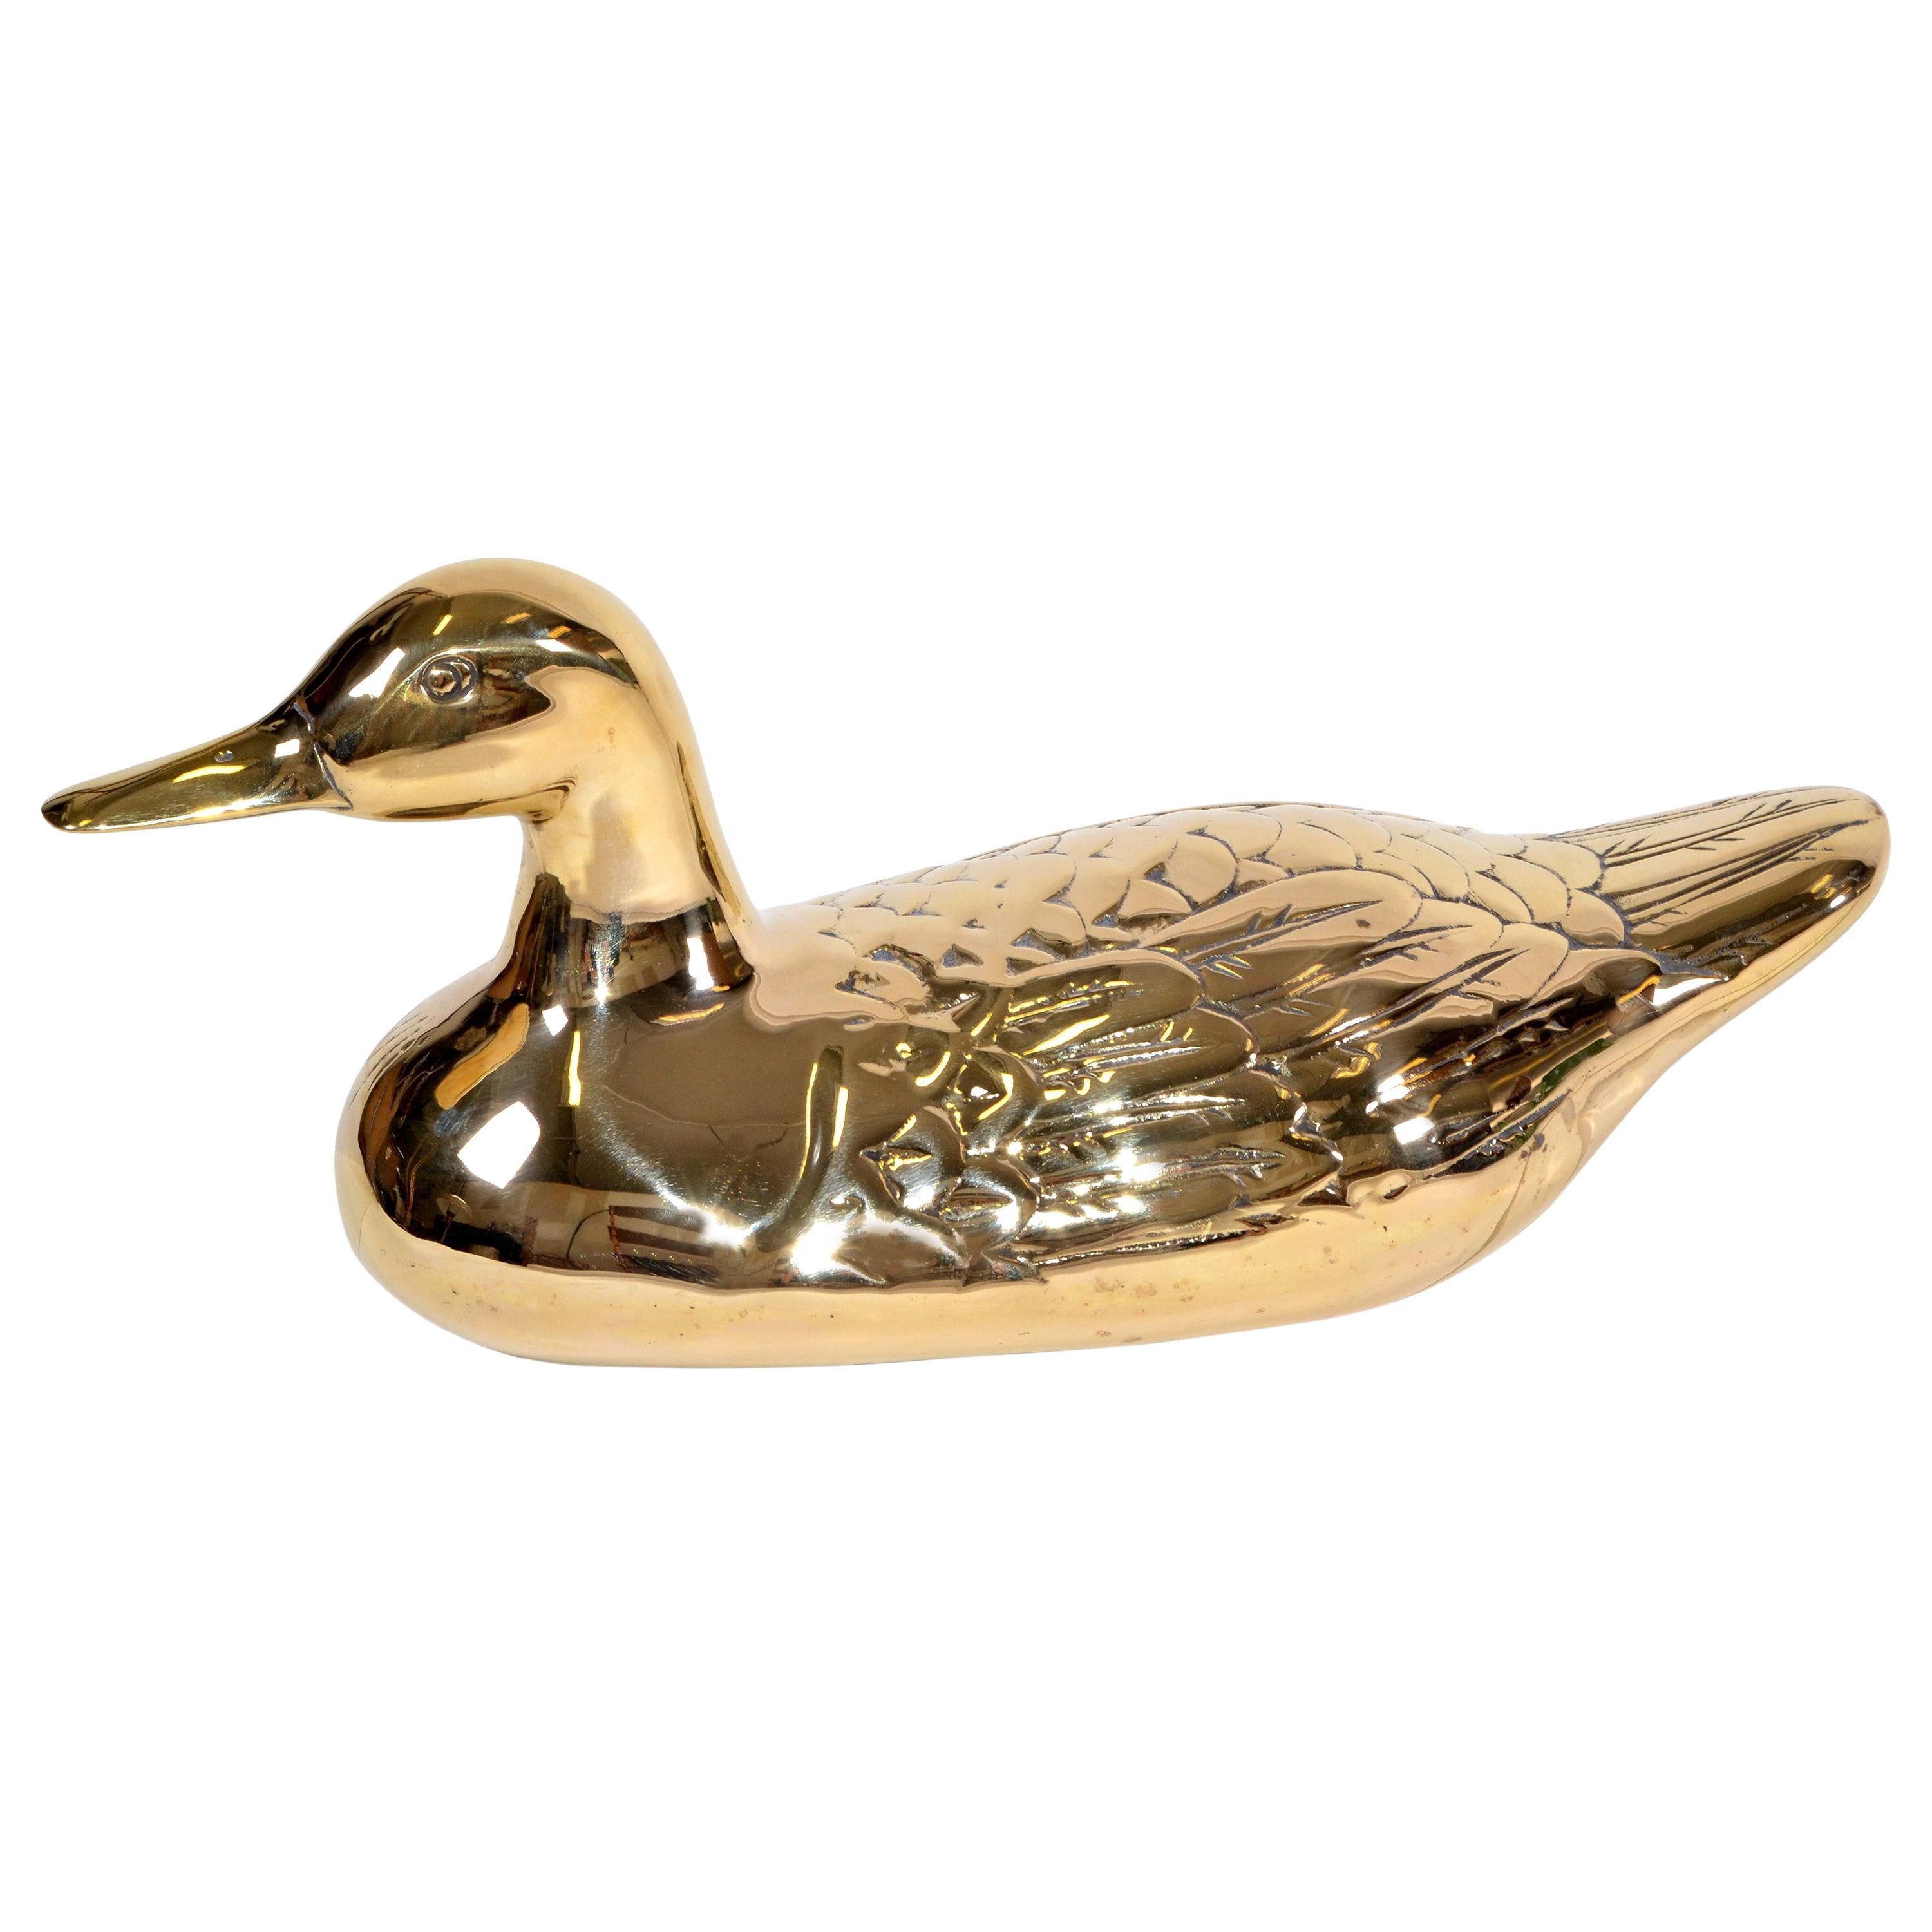 1970 Mid-Century Modern Life-Size Bronze Duck Animal Sculpture Table Decoration For Sale